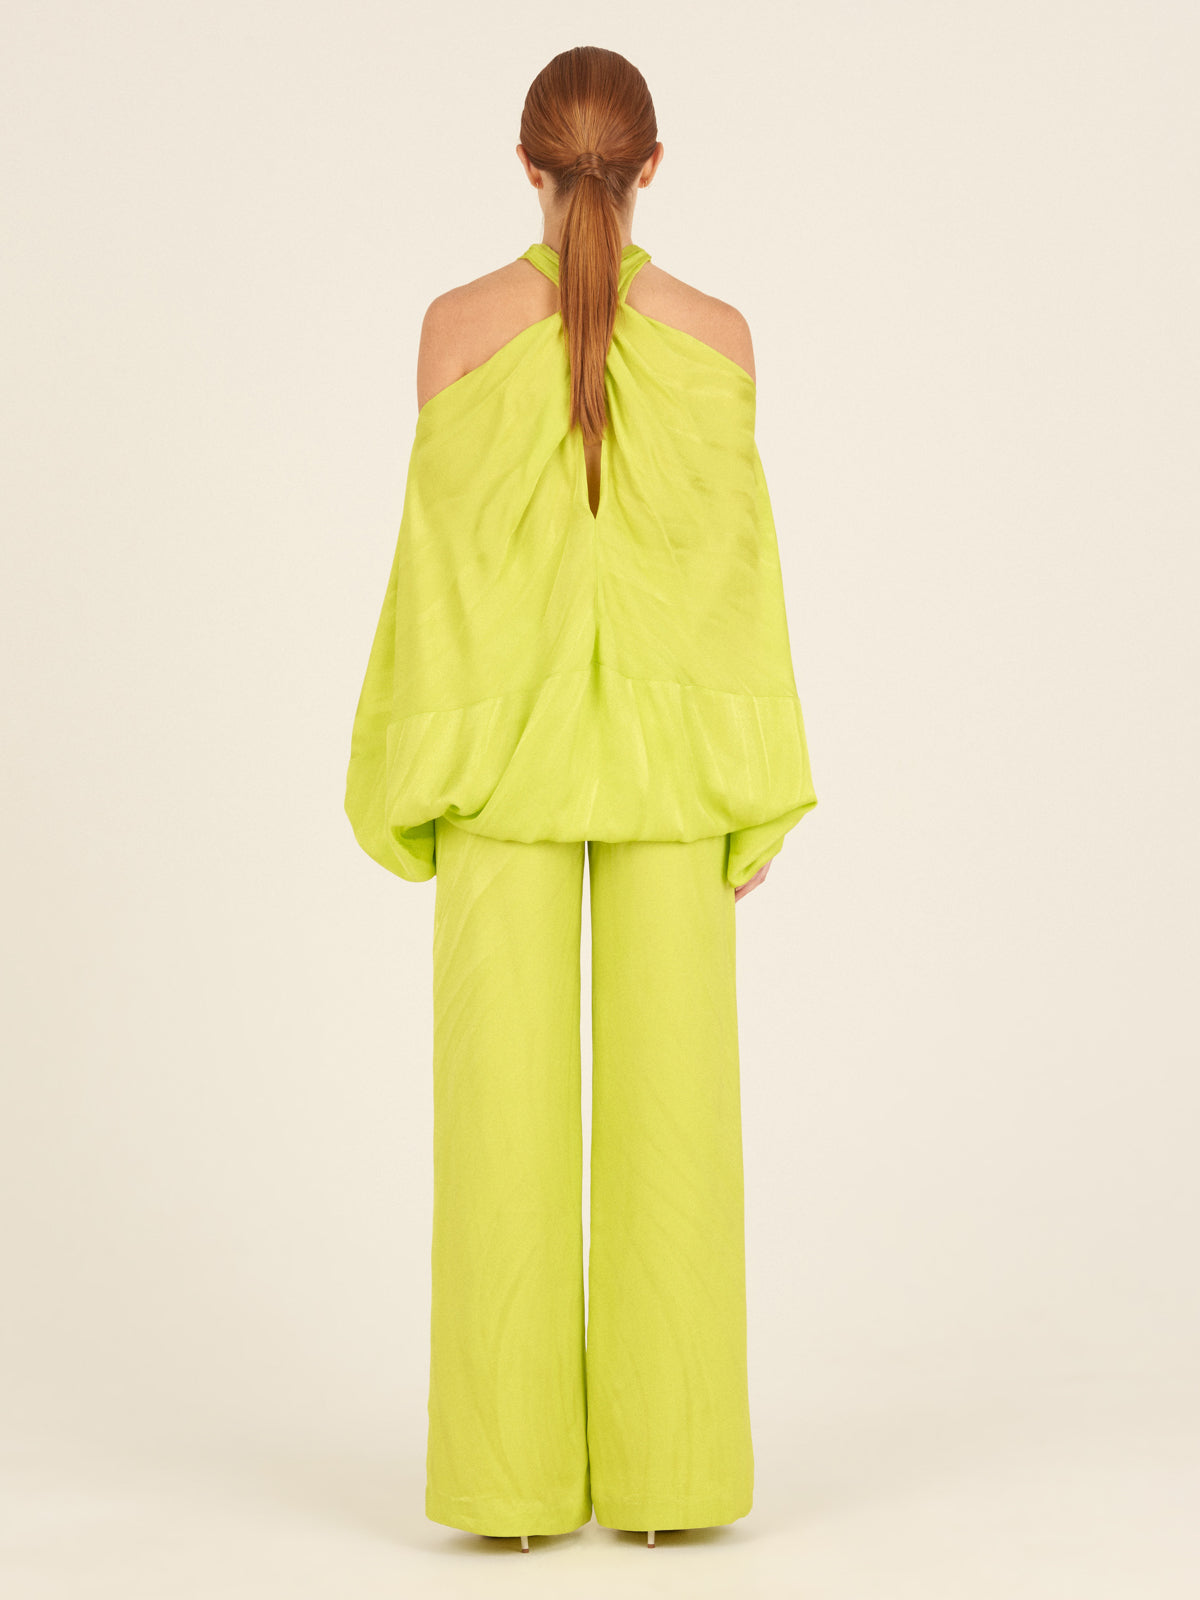 Casey Pant Verde Lime